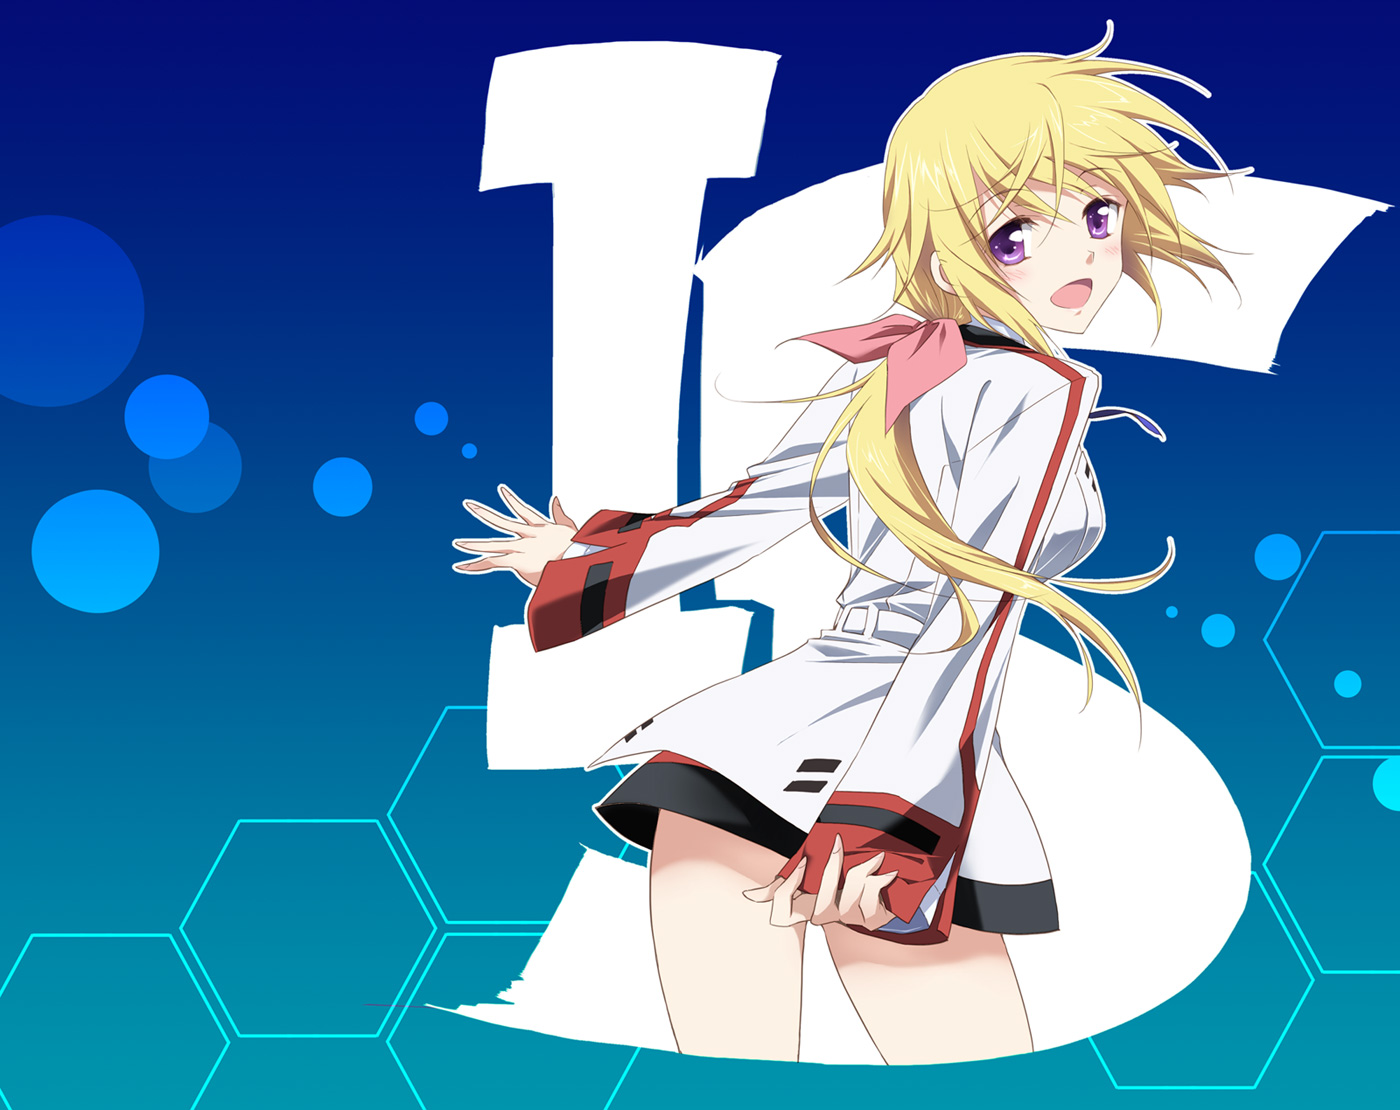 Charlotte Dunois, a character from Infinite Stratos anime, in a desktop wallpaper.